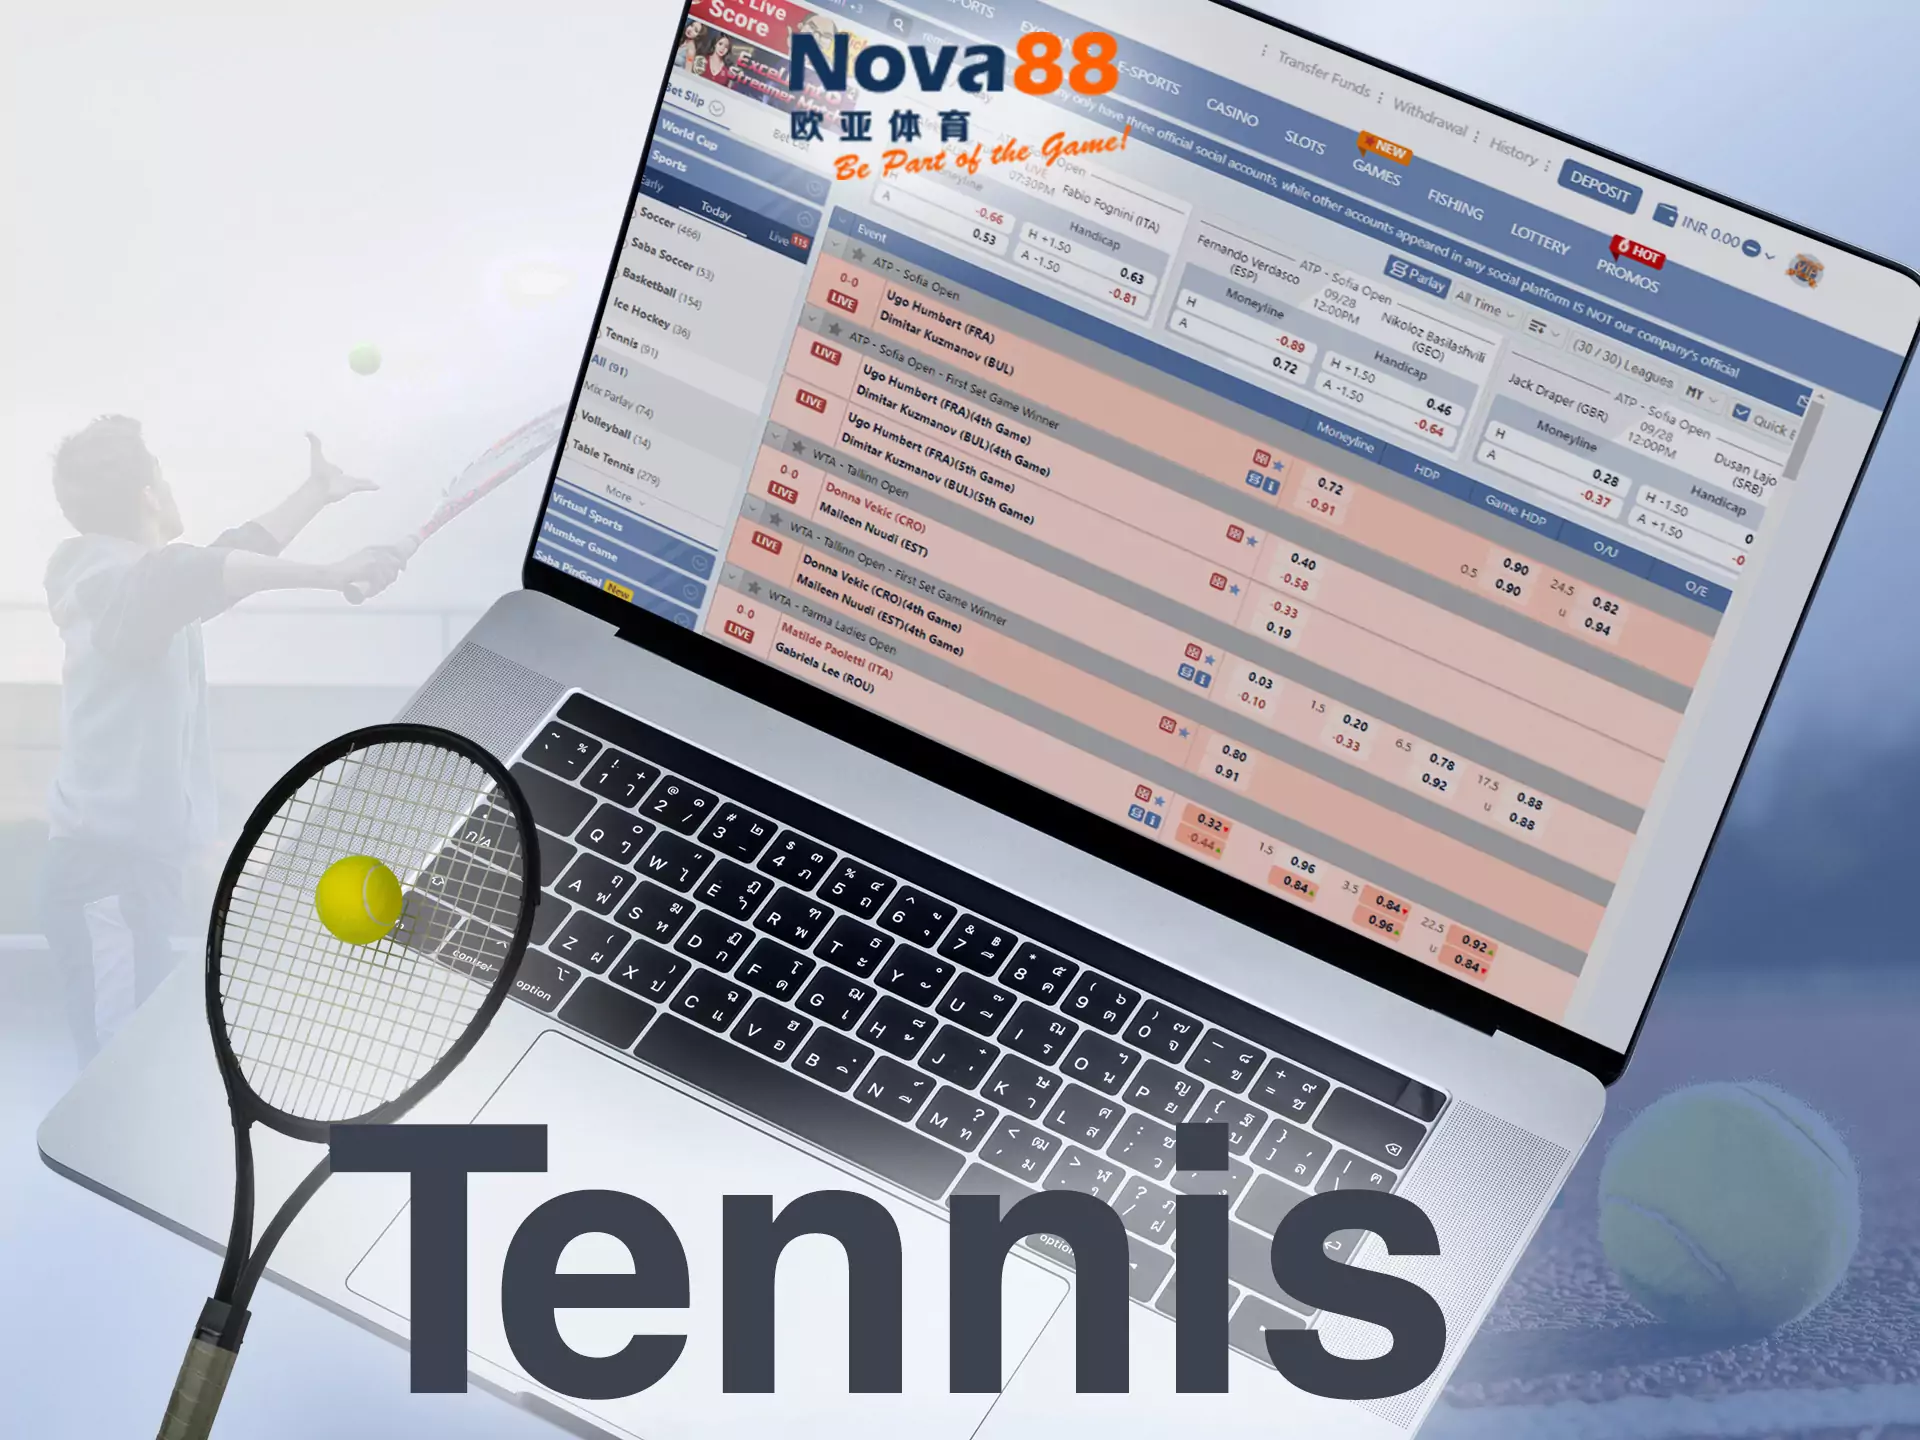 In the Nova88 sportsbook, you find lots of tennis matches.